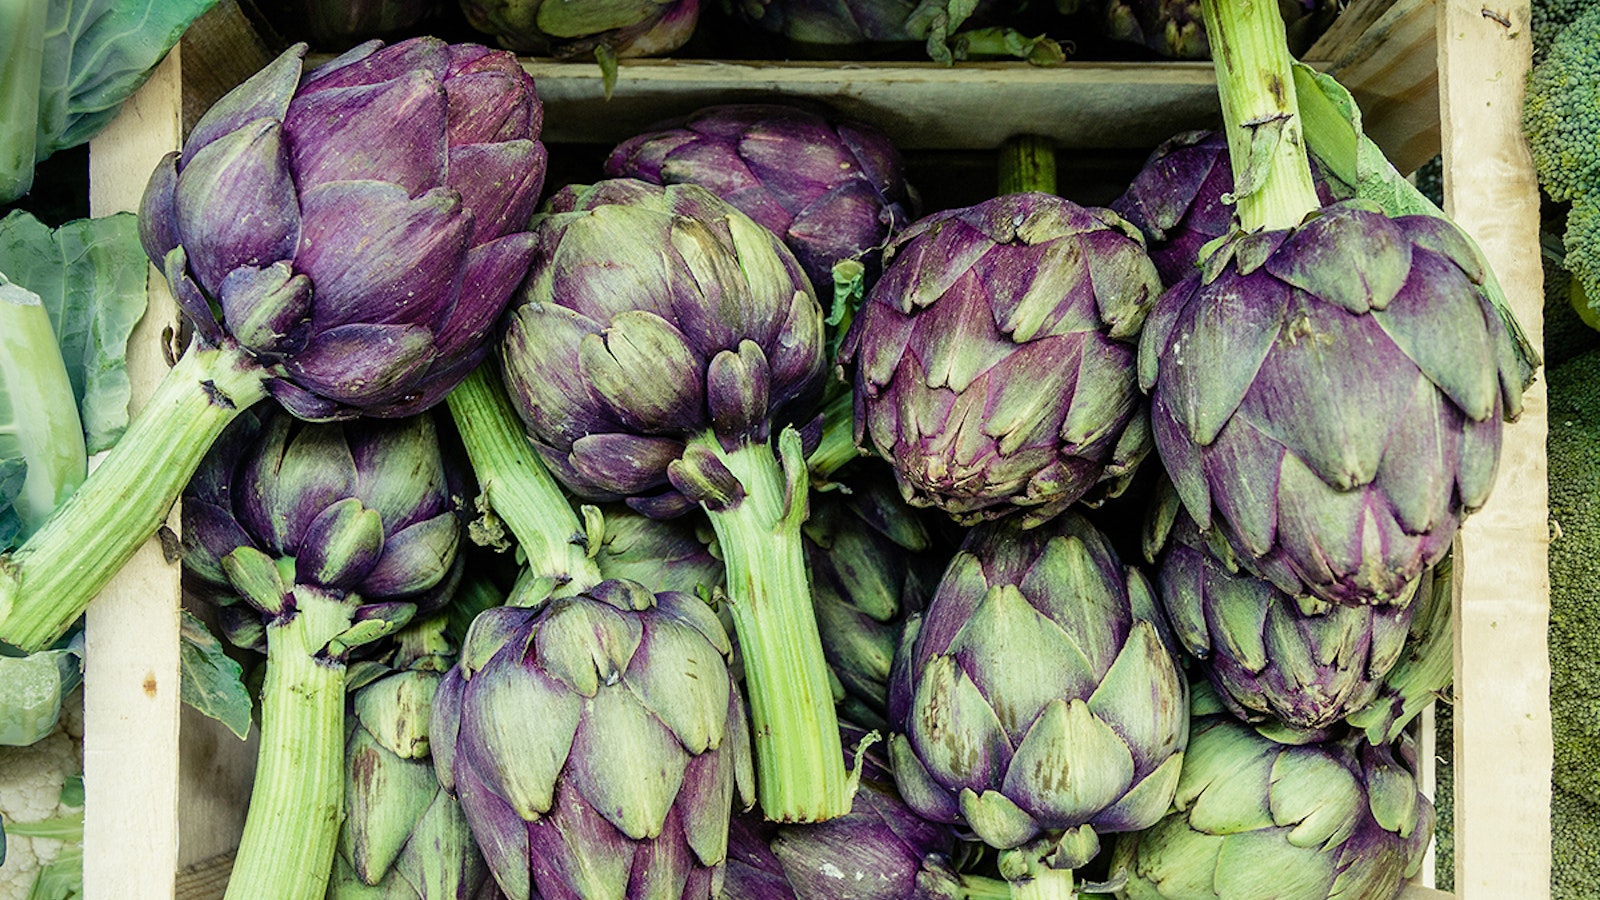 7 In-Season Veg And What To Cook With Them